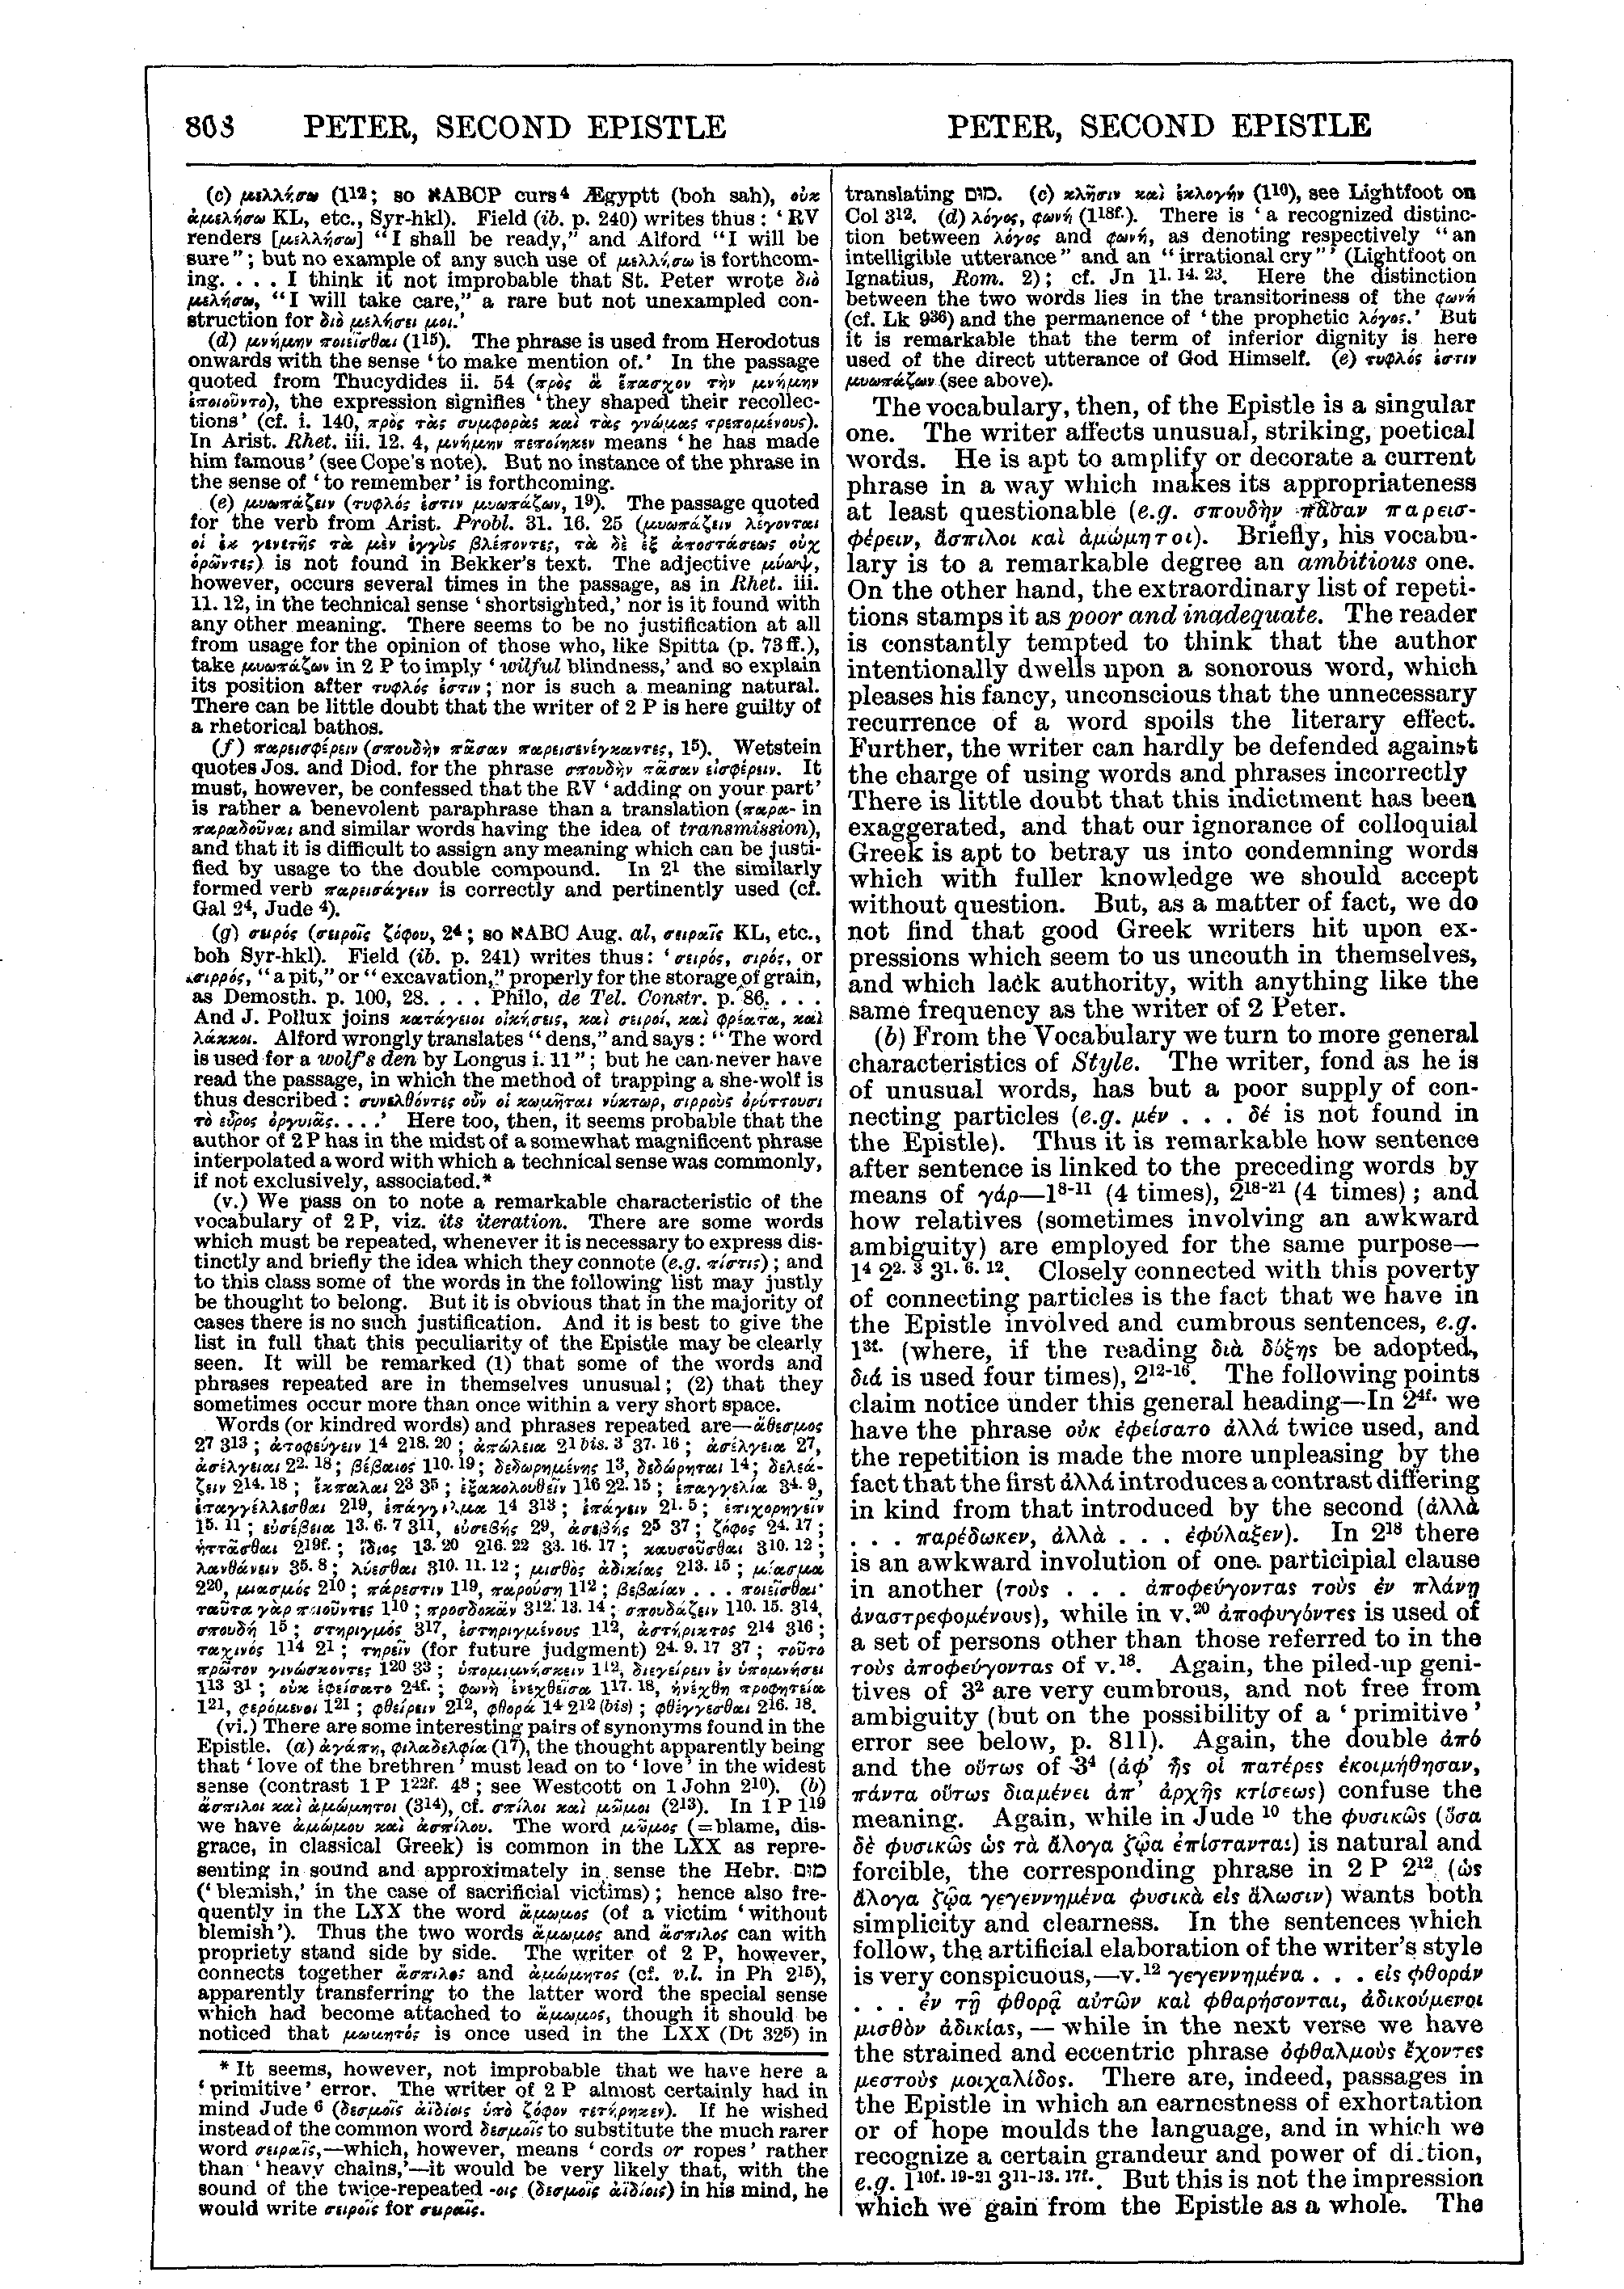 Image of page 808